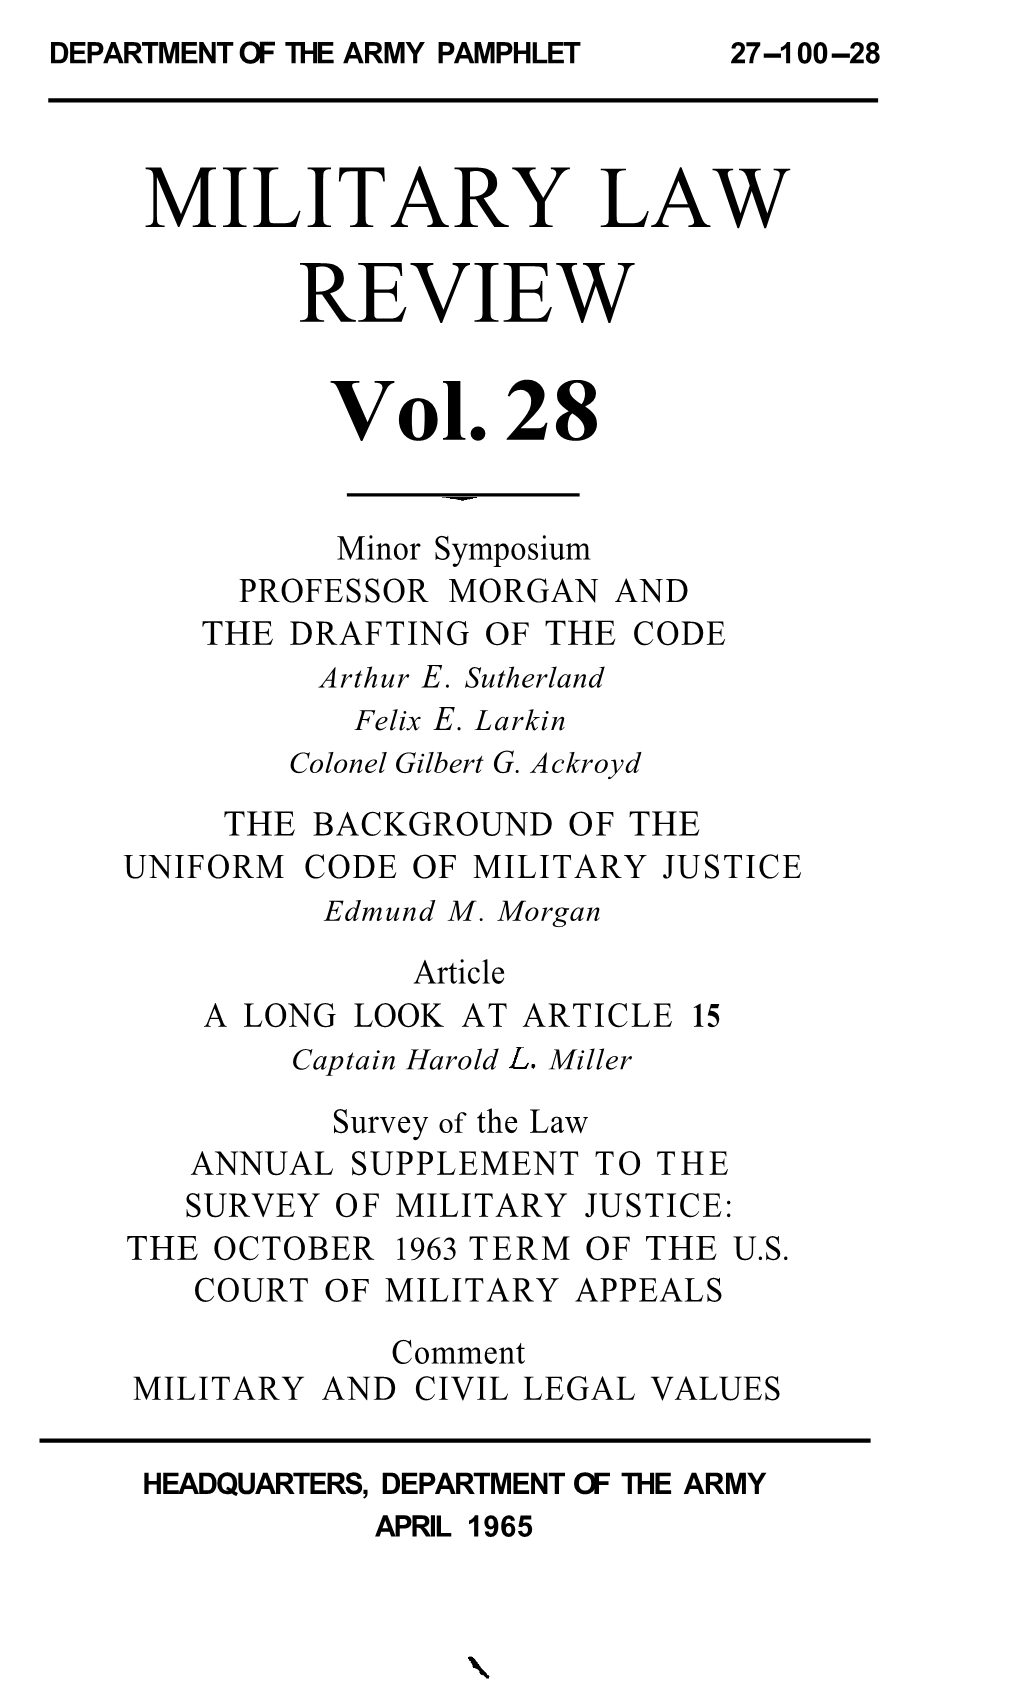 MILITARY LAW REVIEW Vol